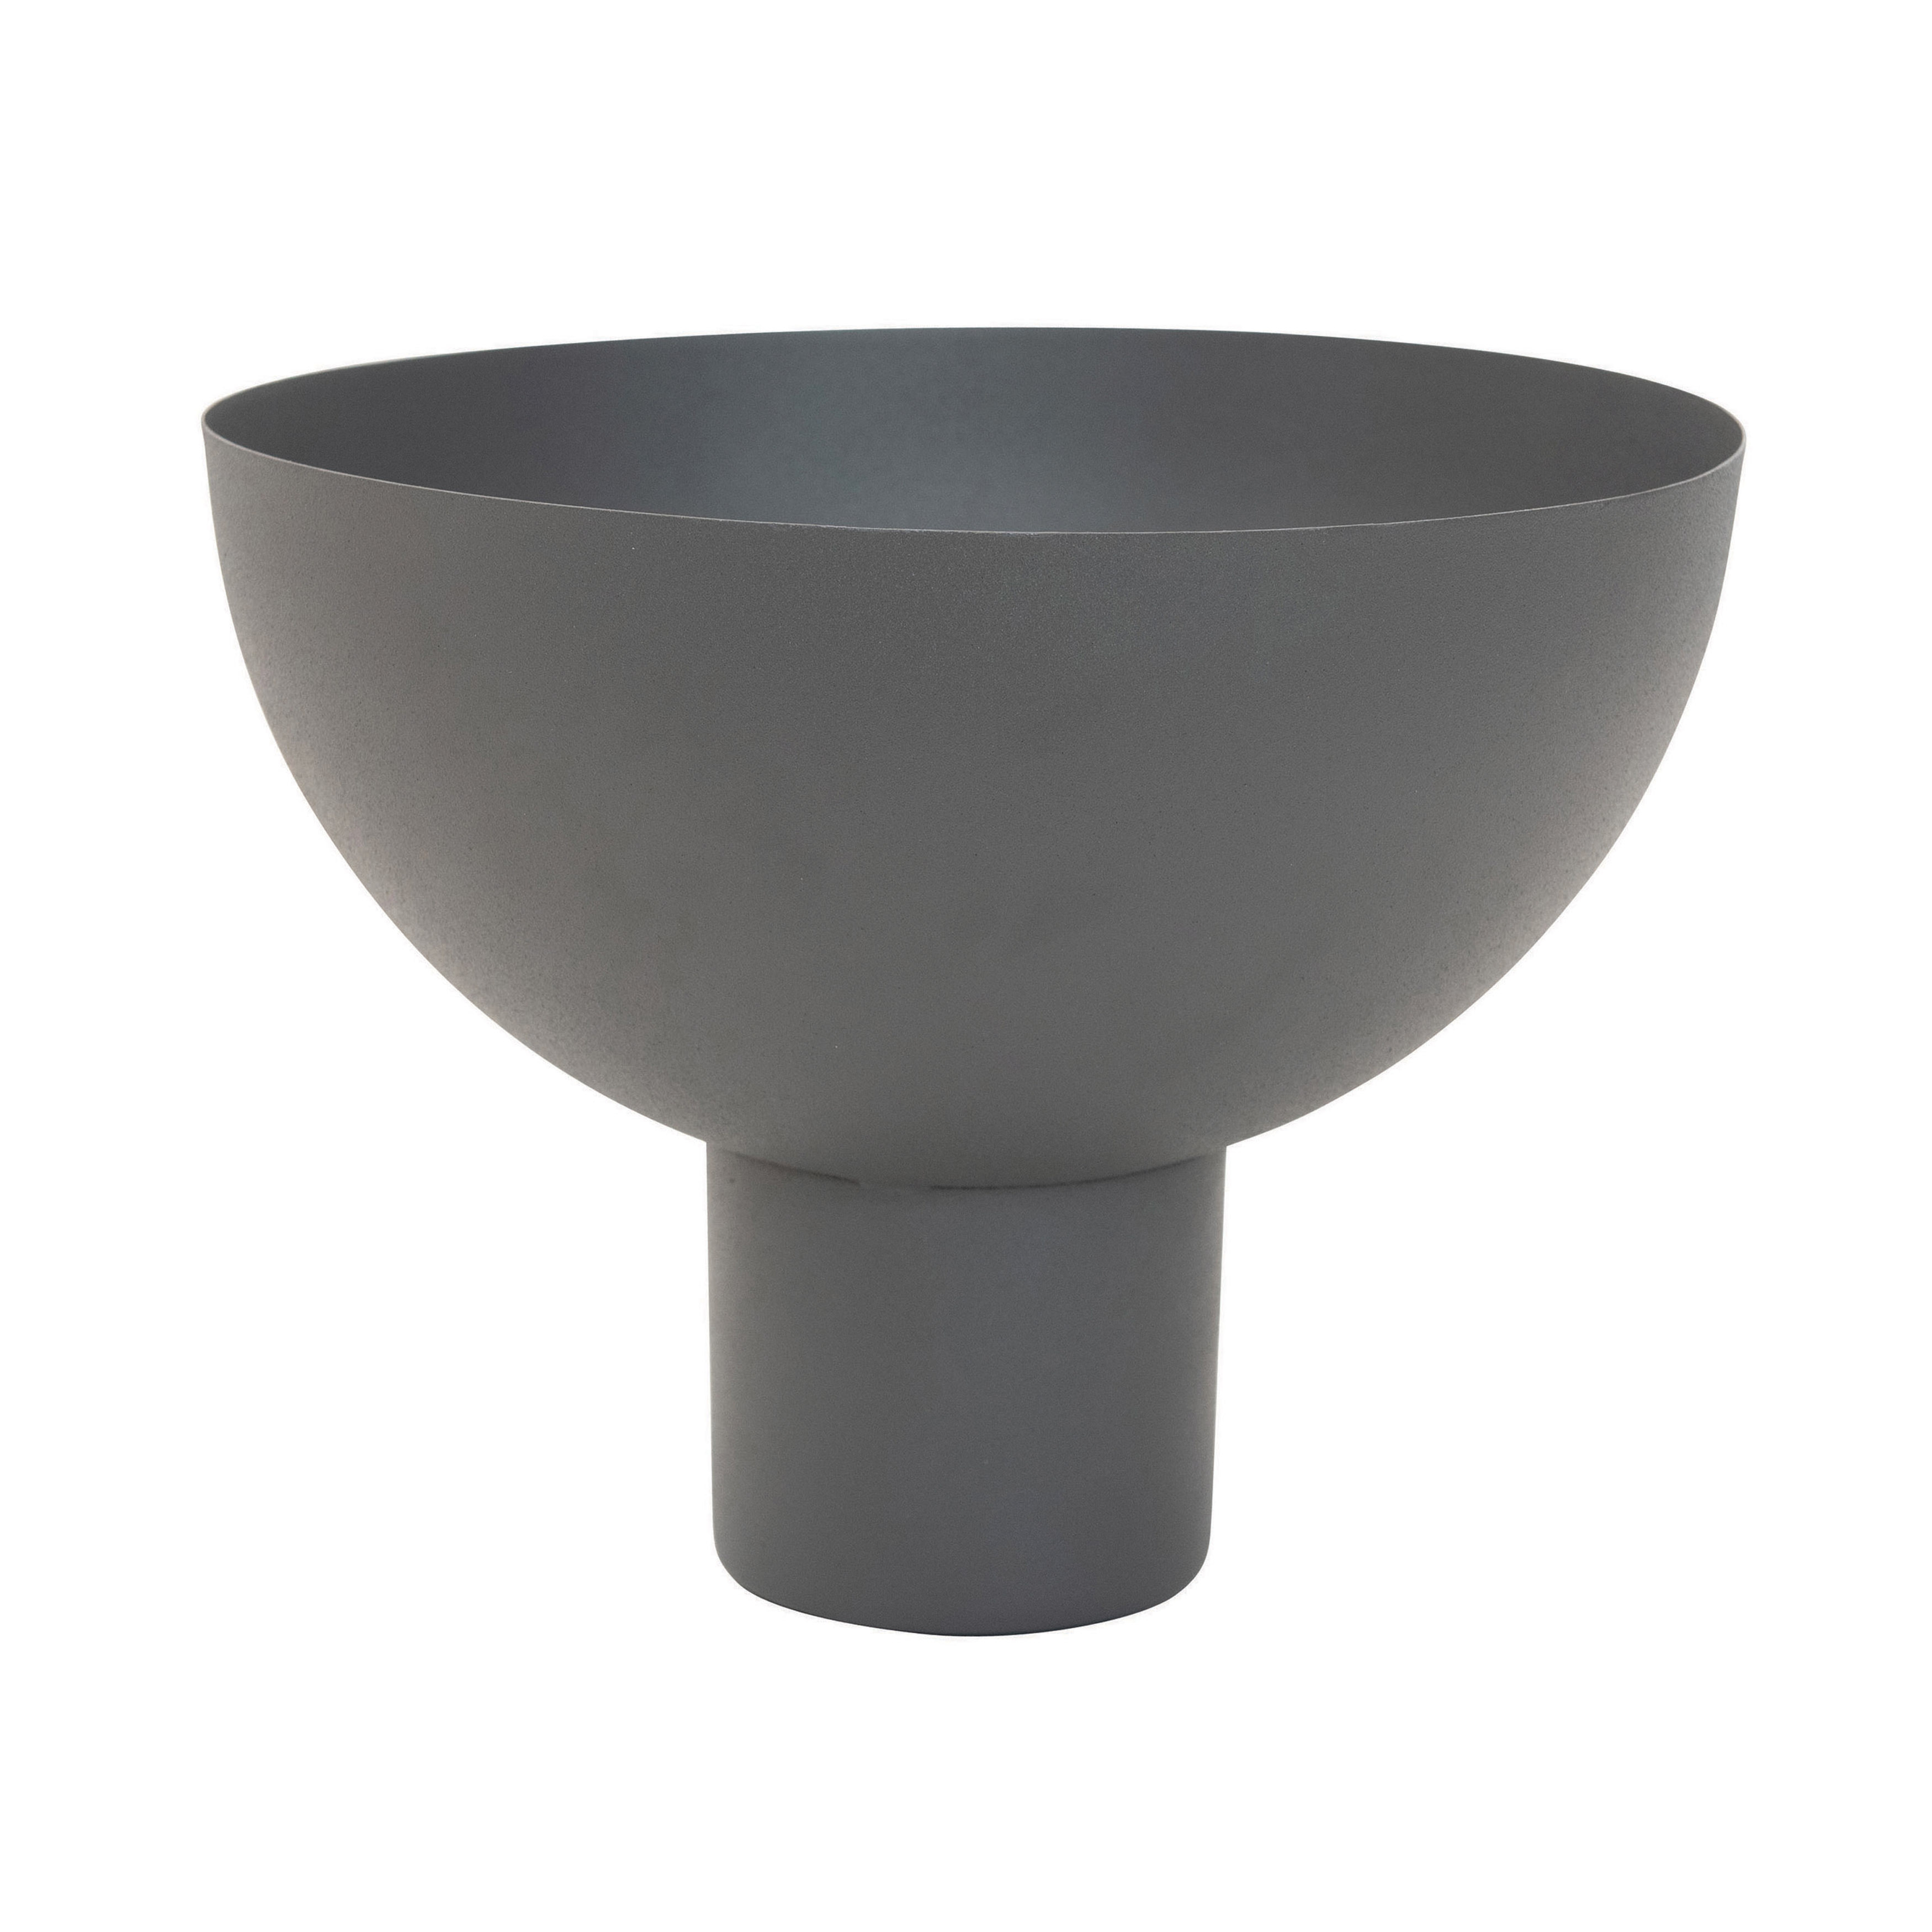 Decorative Metal Footed Bowl, Grey - Moss & Wilder